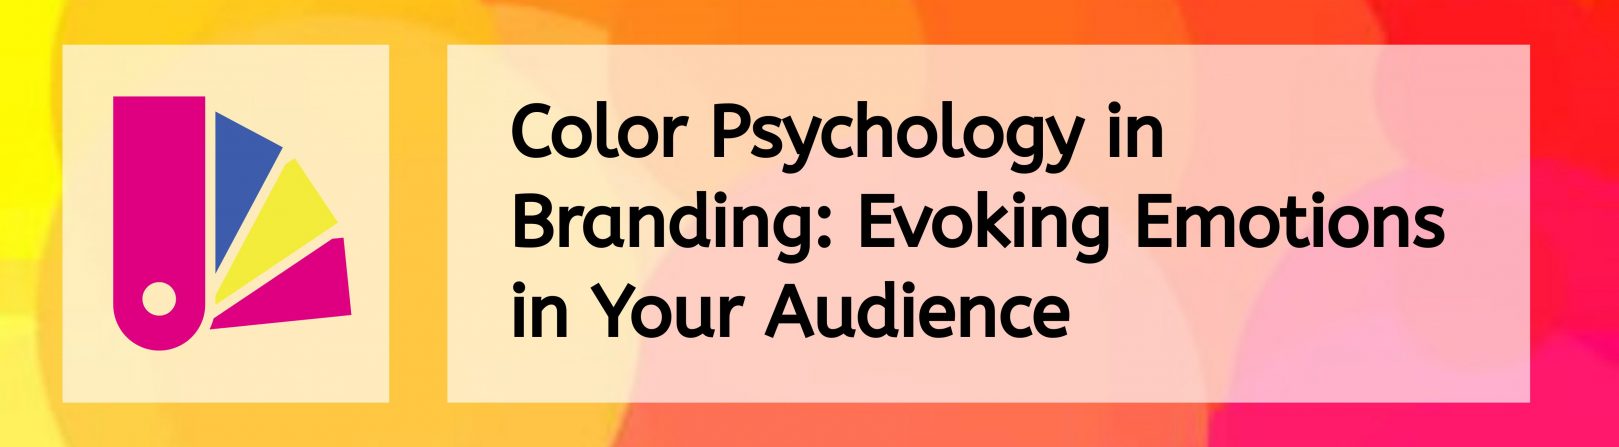 color-psychology-in-branding-evoking-emotions-in-your-audience